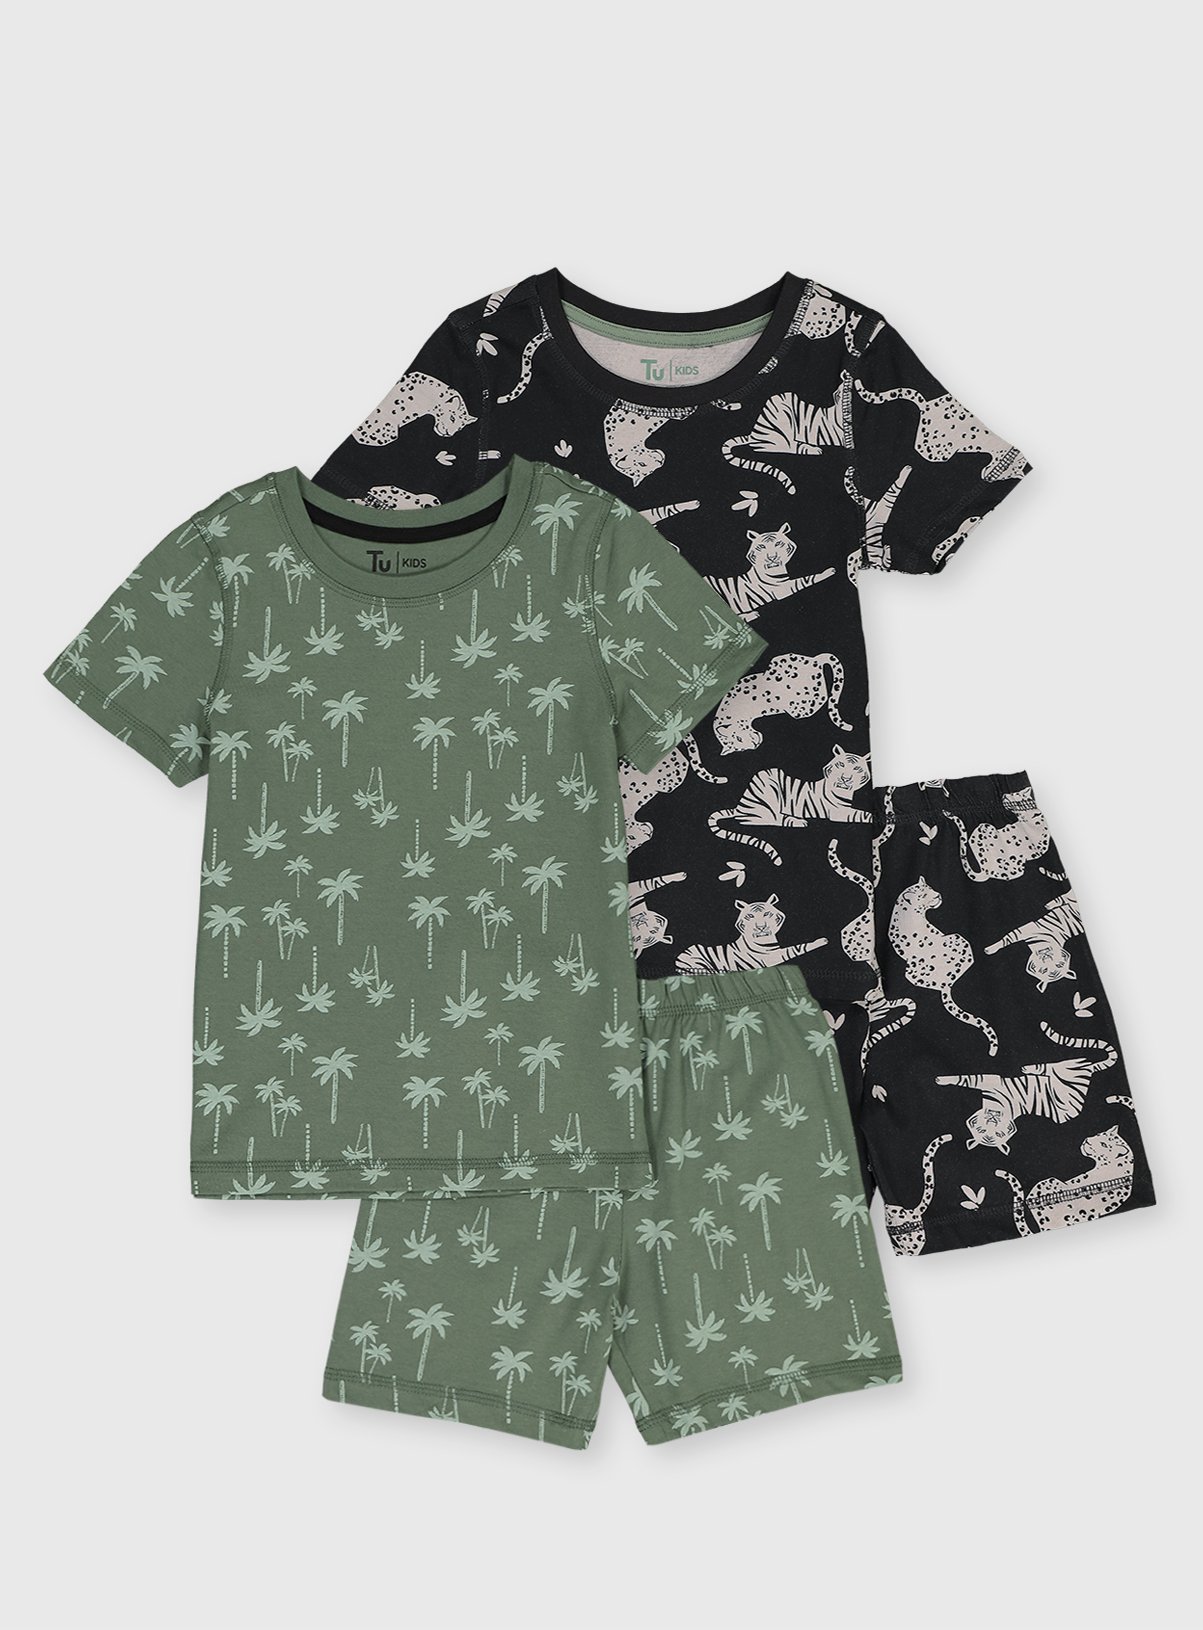 Cool Dinosaur all Over Print  Long Pjs 4 to 8 Years Black and Green